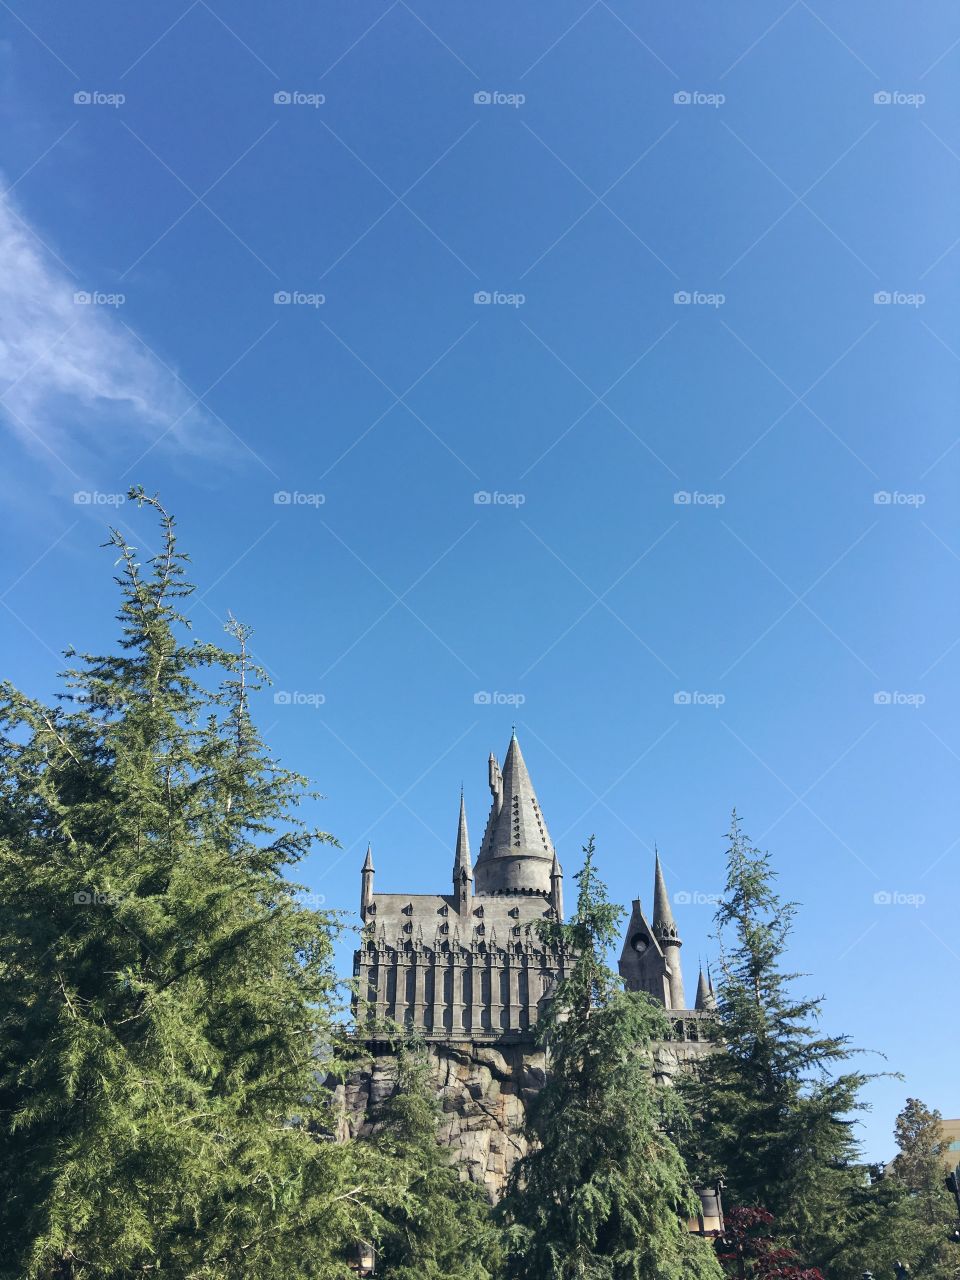 Hog warts castle at Wizarding World of Harry Potter in Universal Studios Hollywood